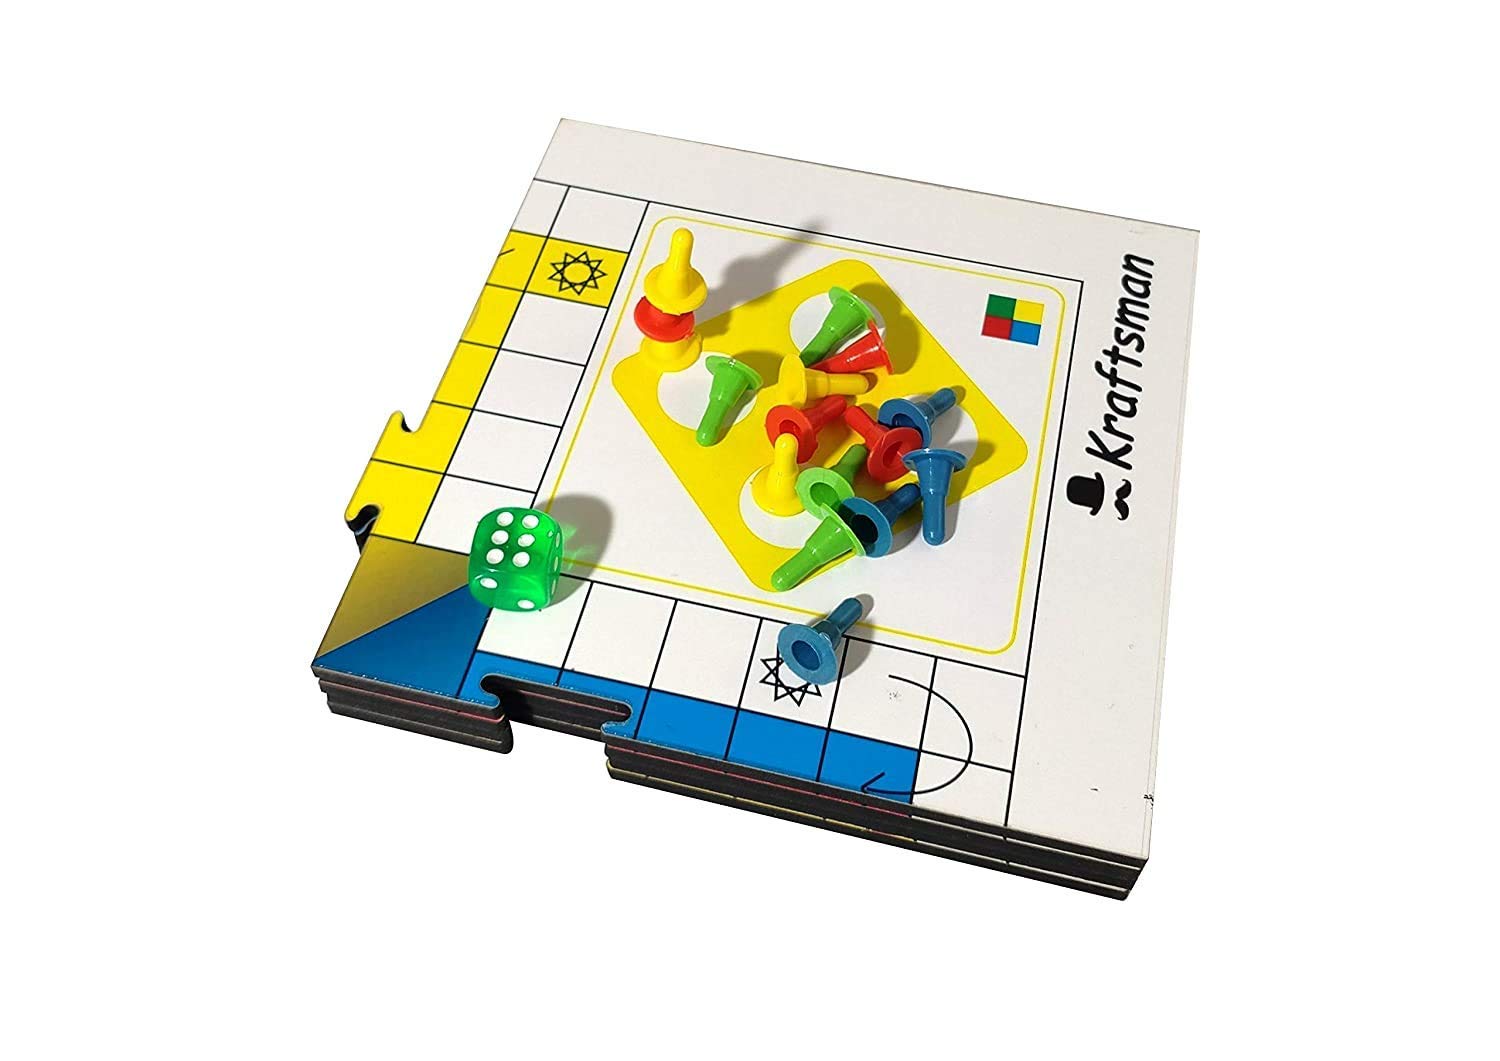 Best Portable wooden board game Easy to carry anywhere you travel, small in size with travel pouch included to safe guard the objects to get lost Develops logical thinking and curiosity development and makes a awesome gift for kids & Adults and Return Gifting Good Quality Best option for Gift 6